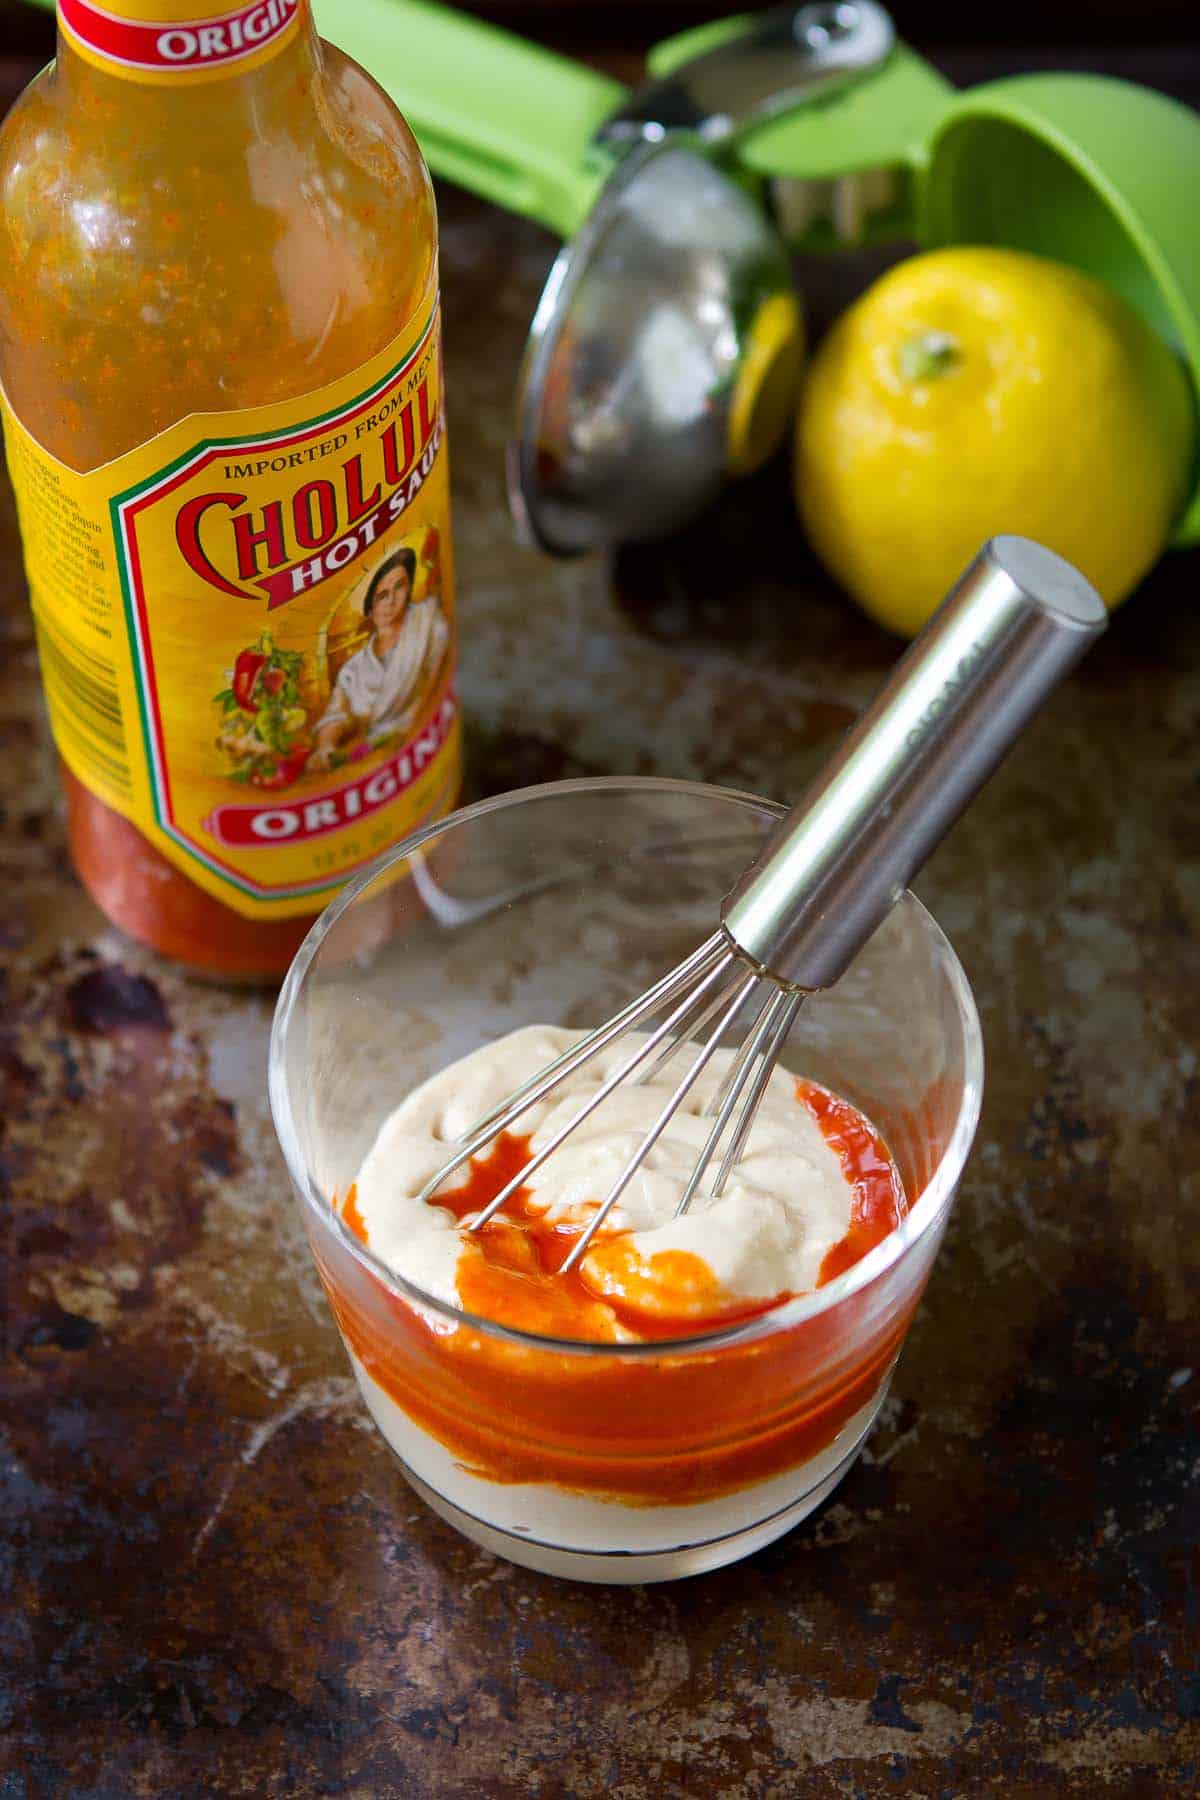 Hummus and hot sauce in a glass. Lemon and hot sauce in background.